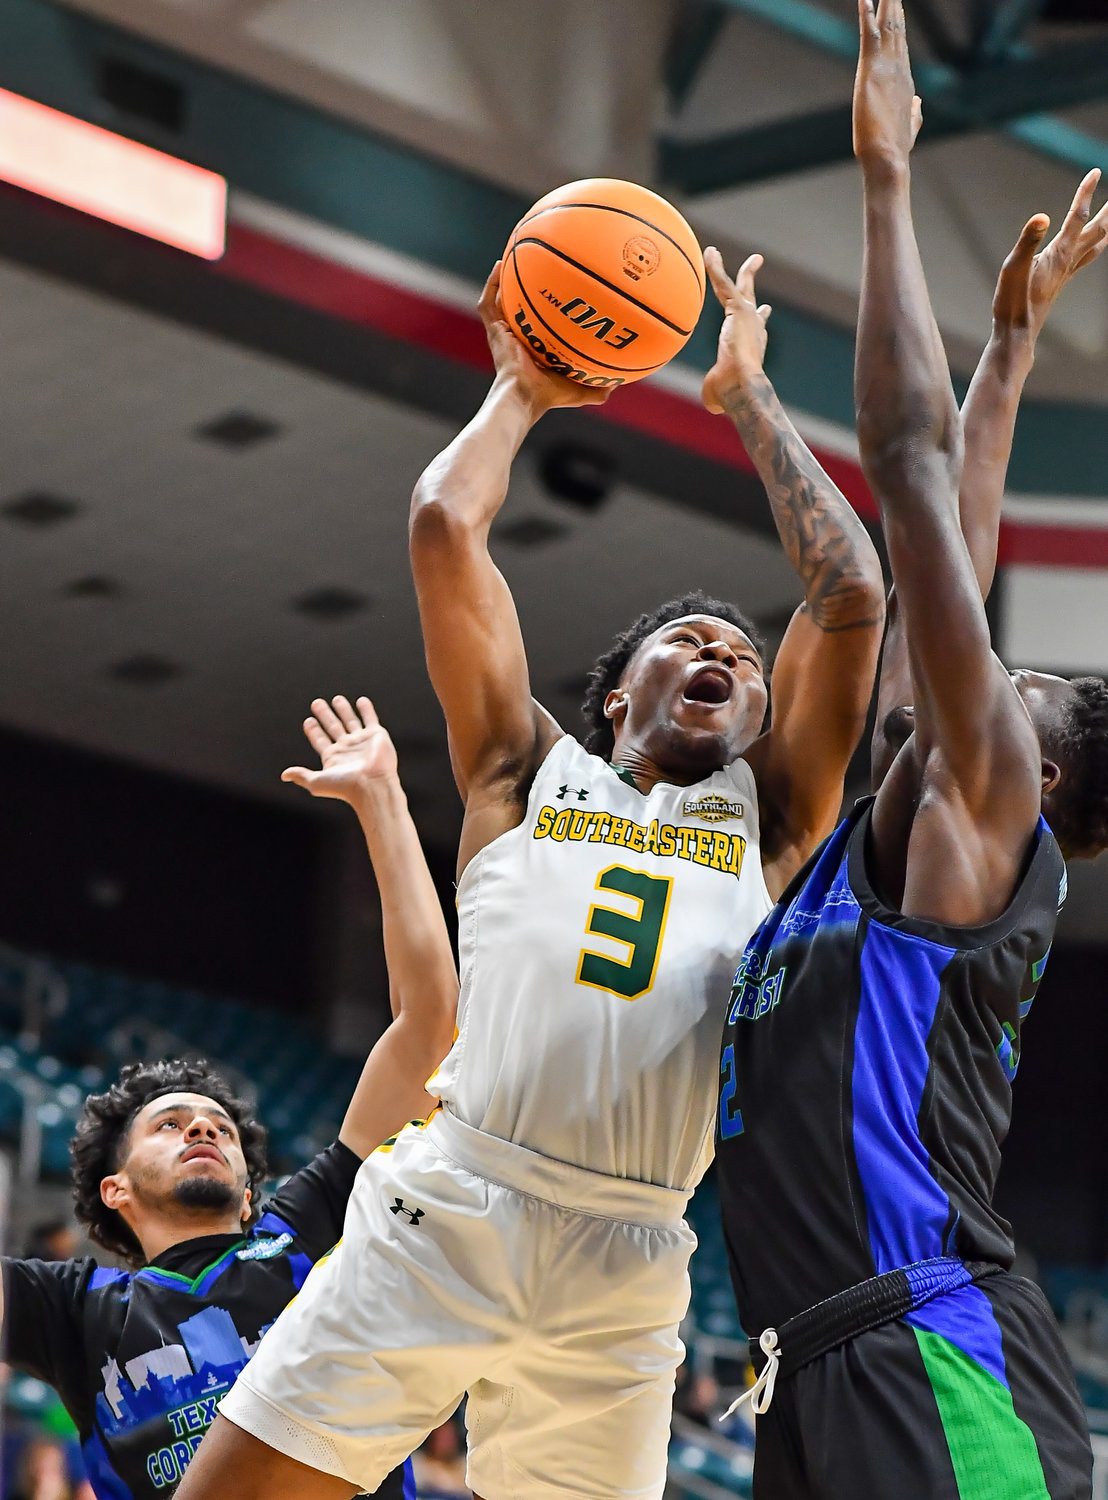 March 12,, 2022:  Southeastern Louisianas Roger McFarlane #3 drives up to the basket during the Southland Conference Basketball Championship game between A&M Corpus Christi vs Southeastern Louisiana. (Photo by Mark Goodman / Katy Times)